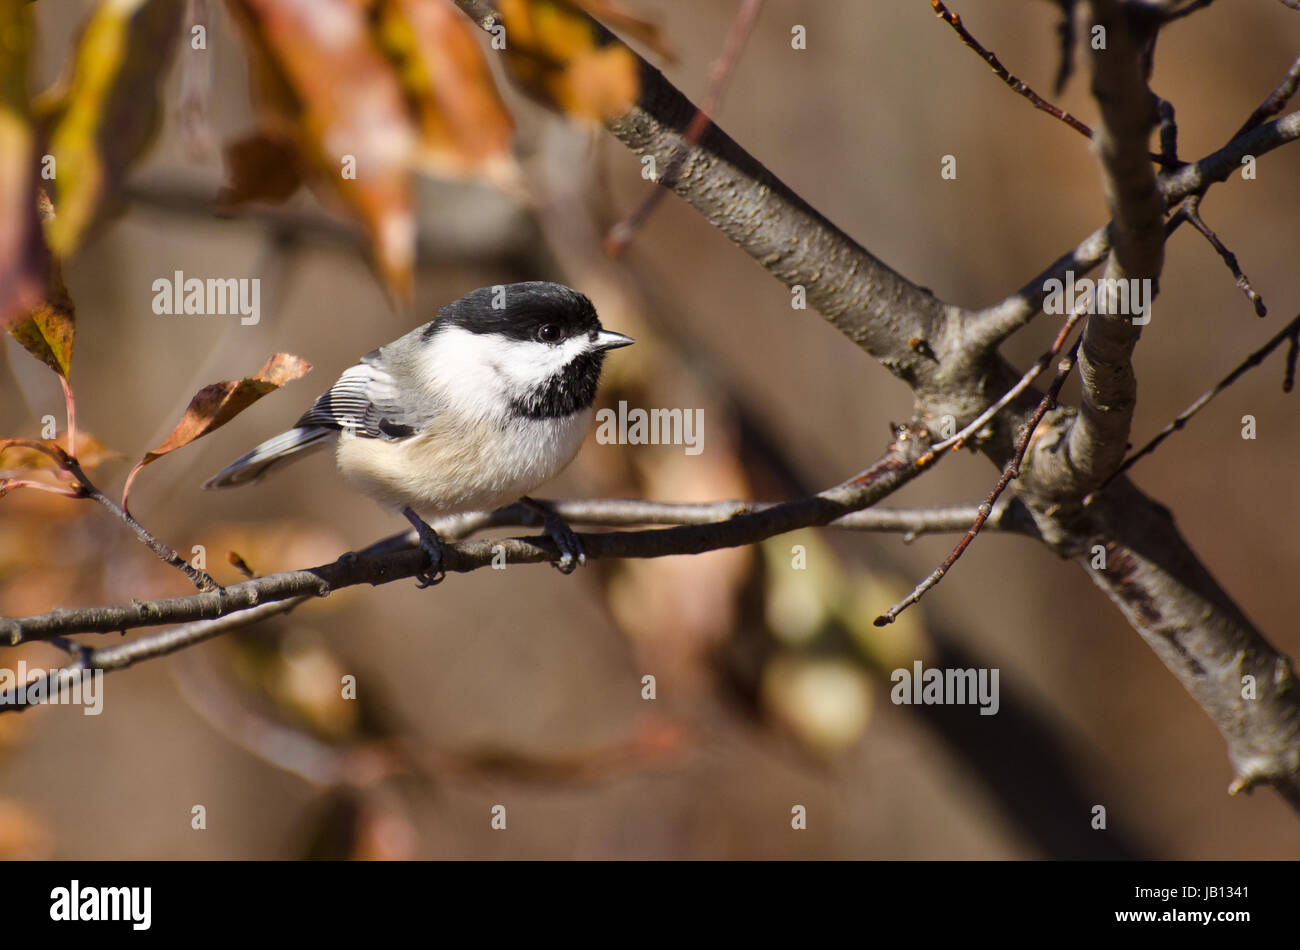 Black-Capped Chickadee perched on a branch in Autumn Stock Photo